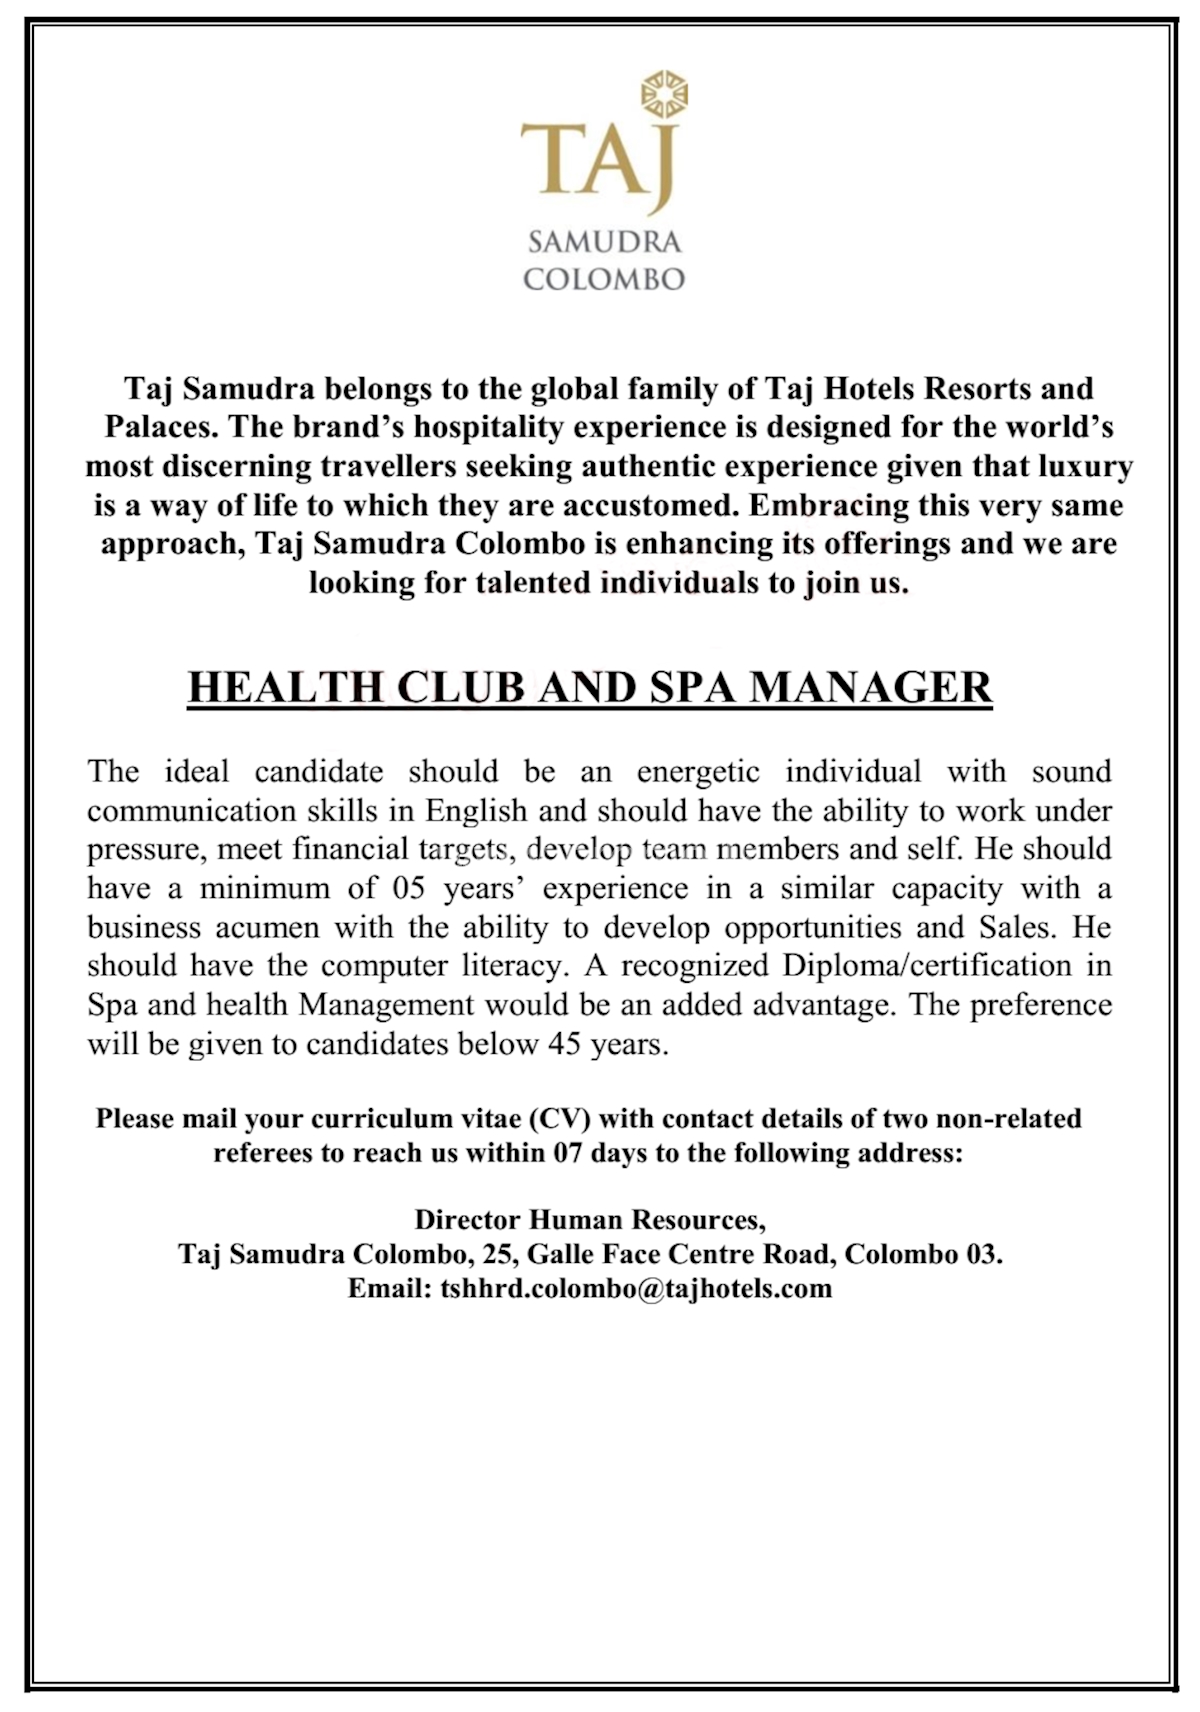 Health Club and Spa Manager